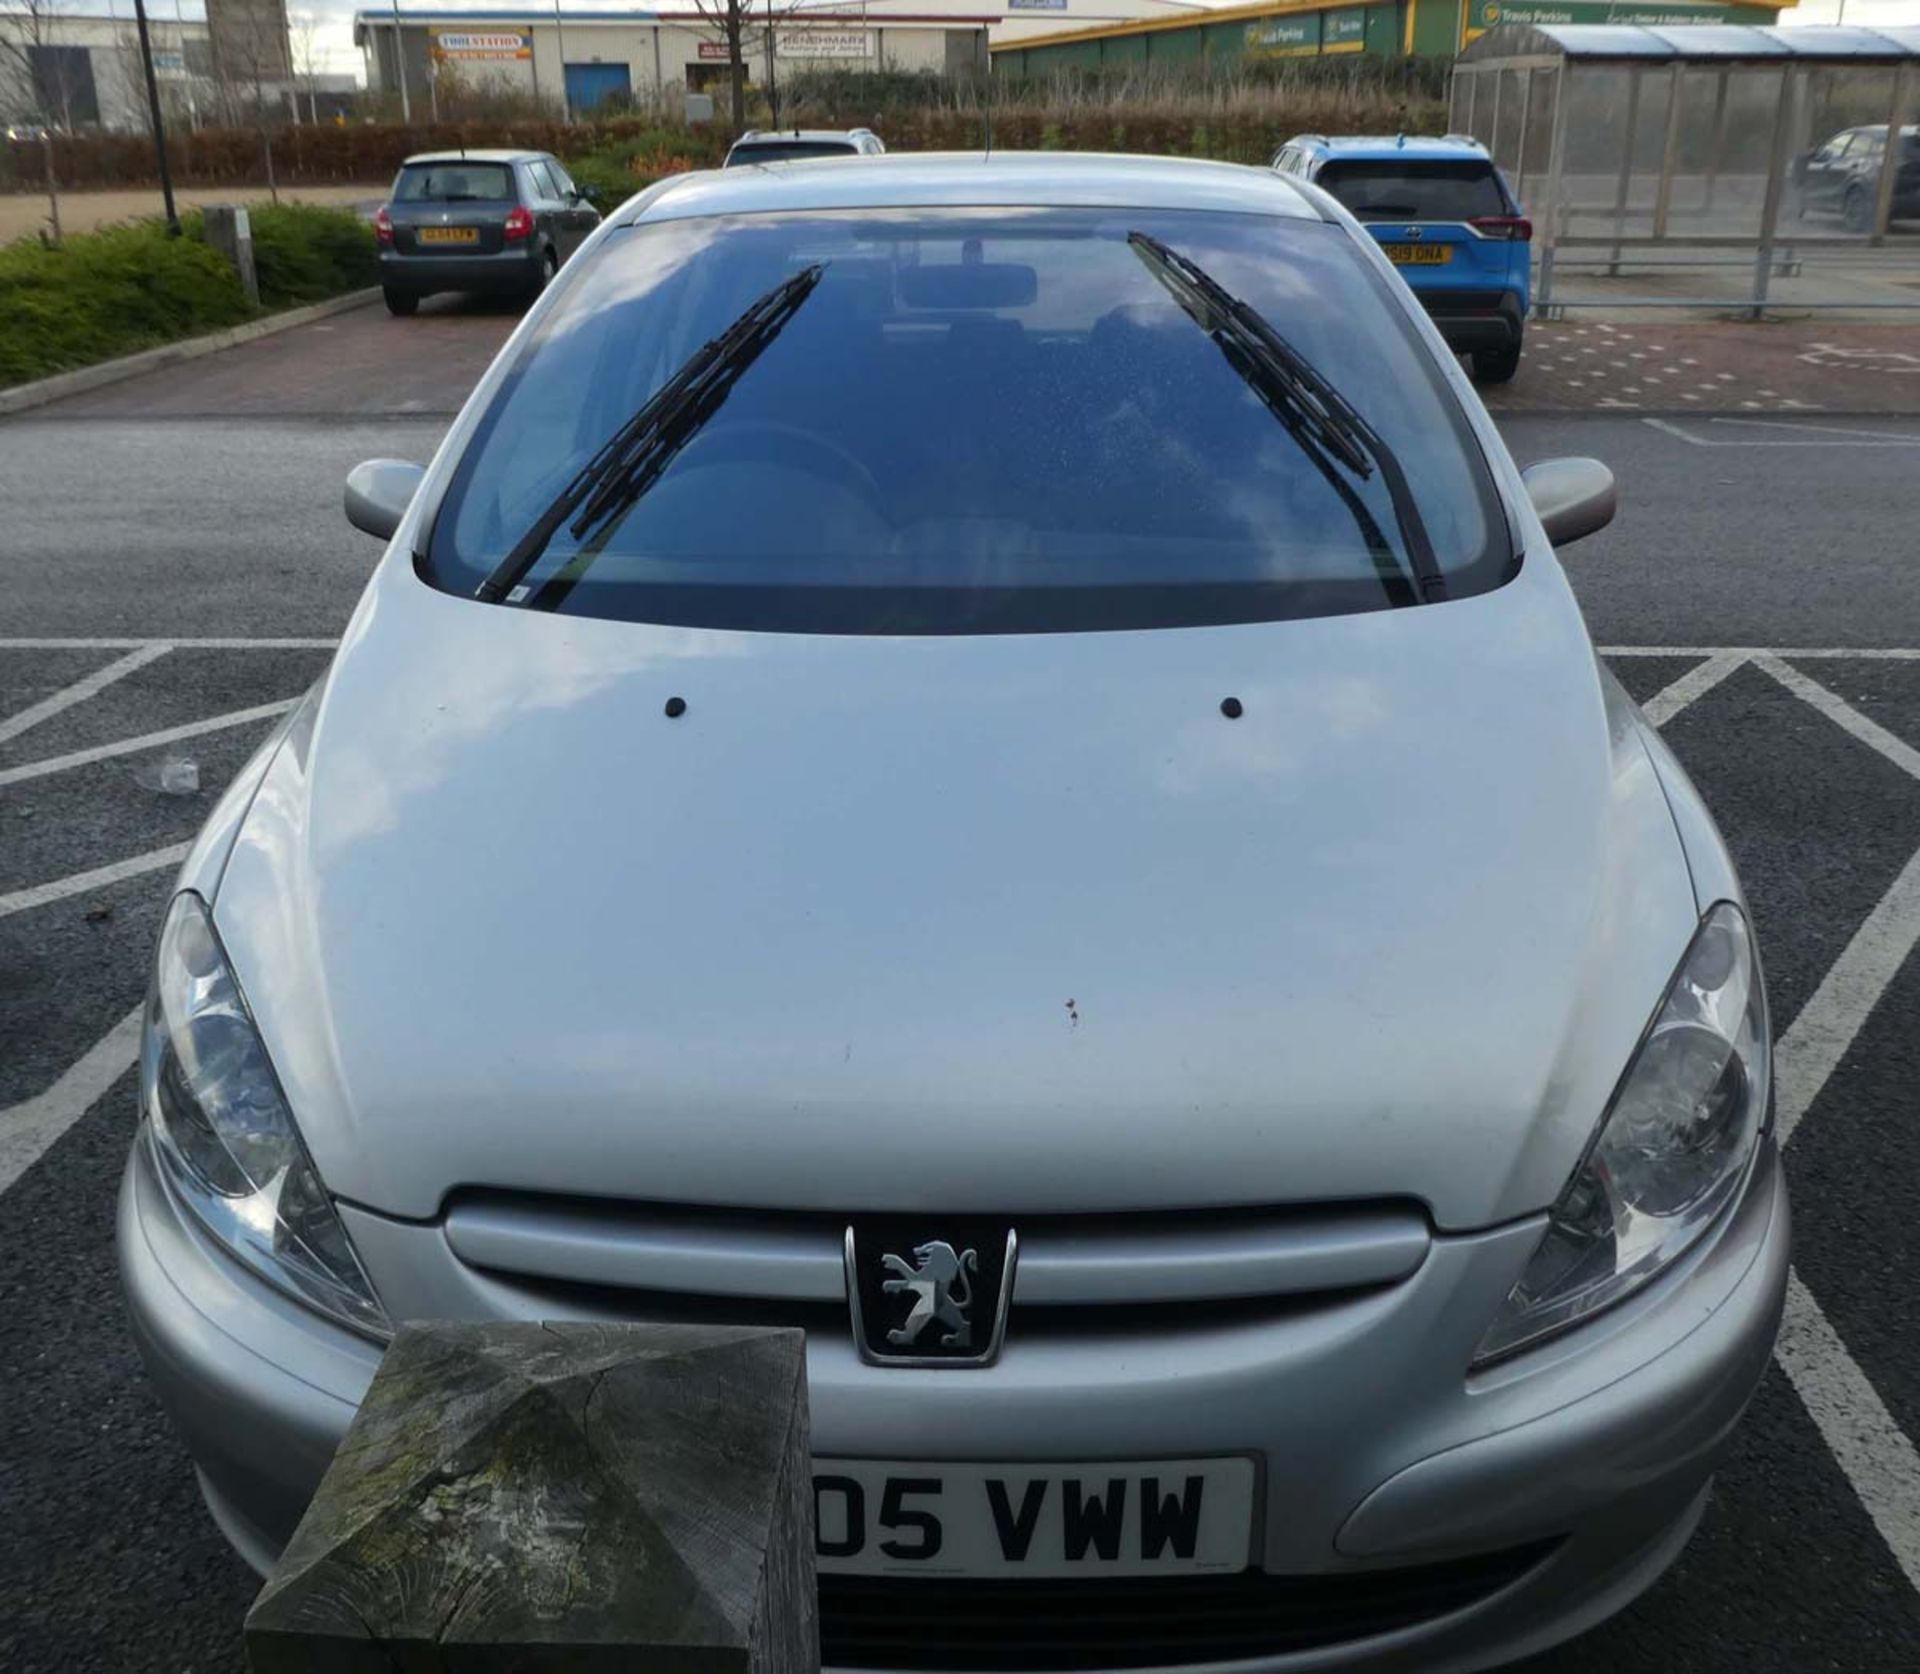 KM05 VWW (2005) Peugeot 307 in silver, 1560cc, diesel, 4 former keepers, 1 key, first registered - Image 10 of 10